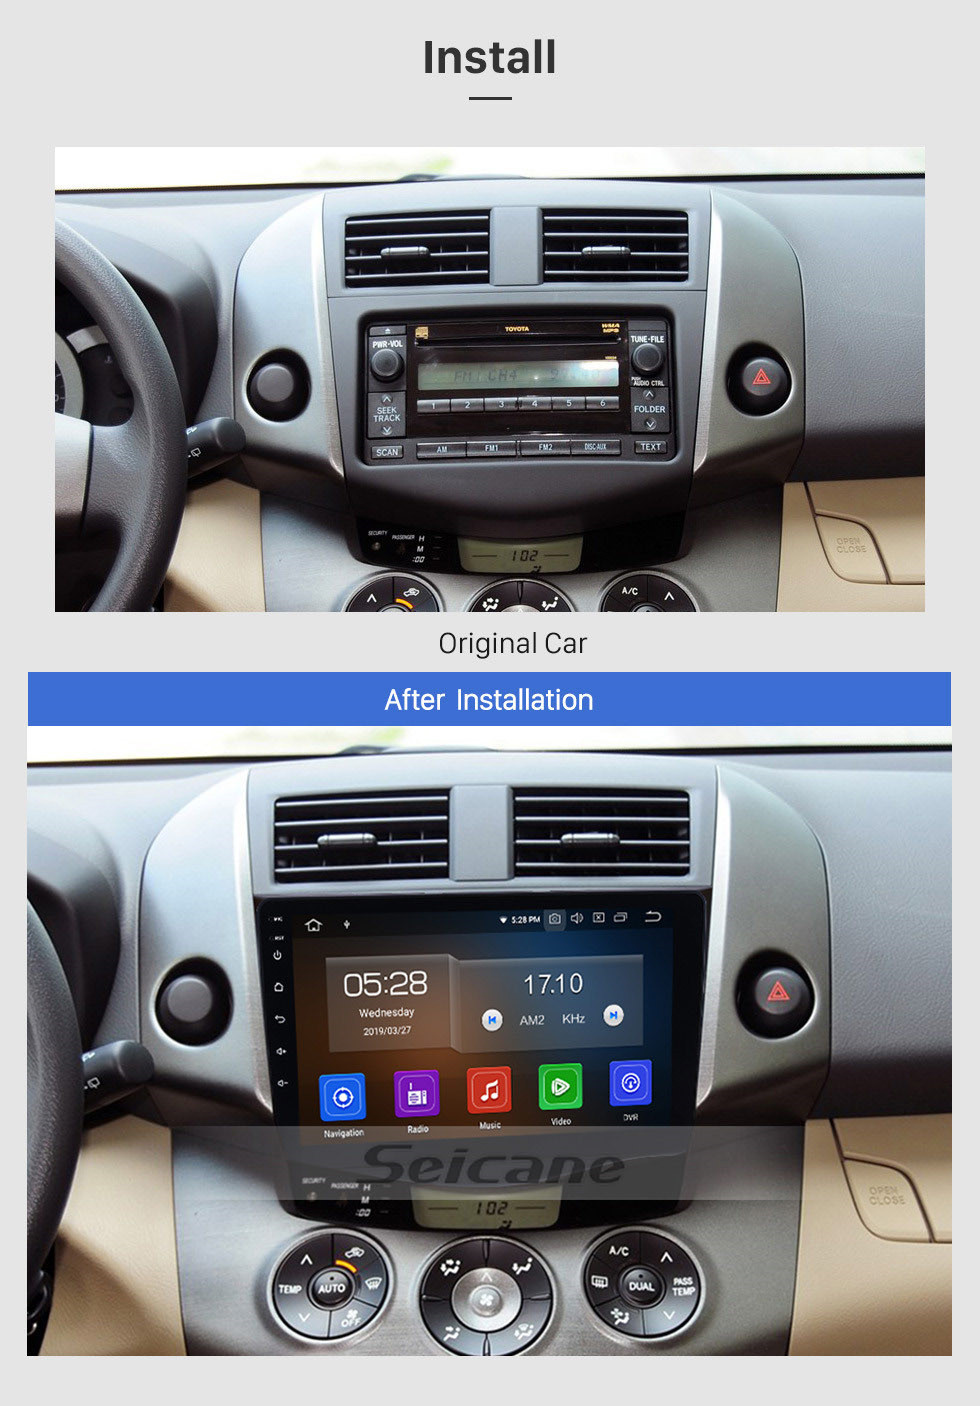 Seicane OEM GPS Navigation Stereo Android 11.0 Multimedia Player for 2007-2011 Toyota RAV4 9 inch HD Touchscreen Radio Bluetooth Phone Music USB Carplay WIFI Steering Wheel Control Rearview AUX